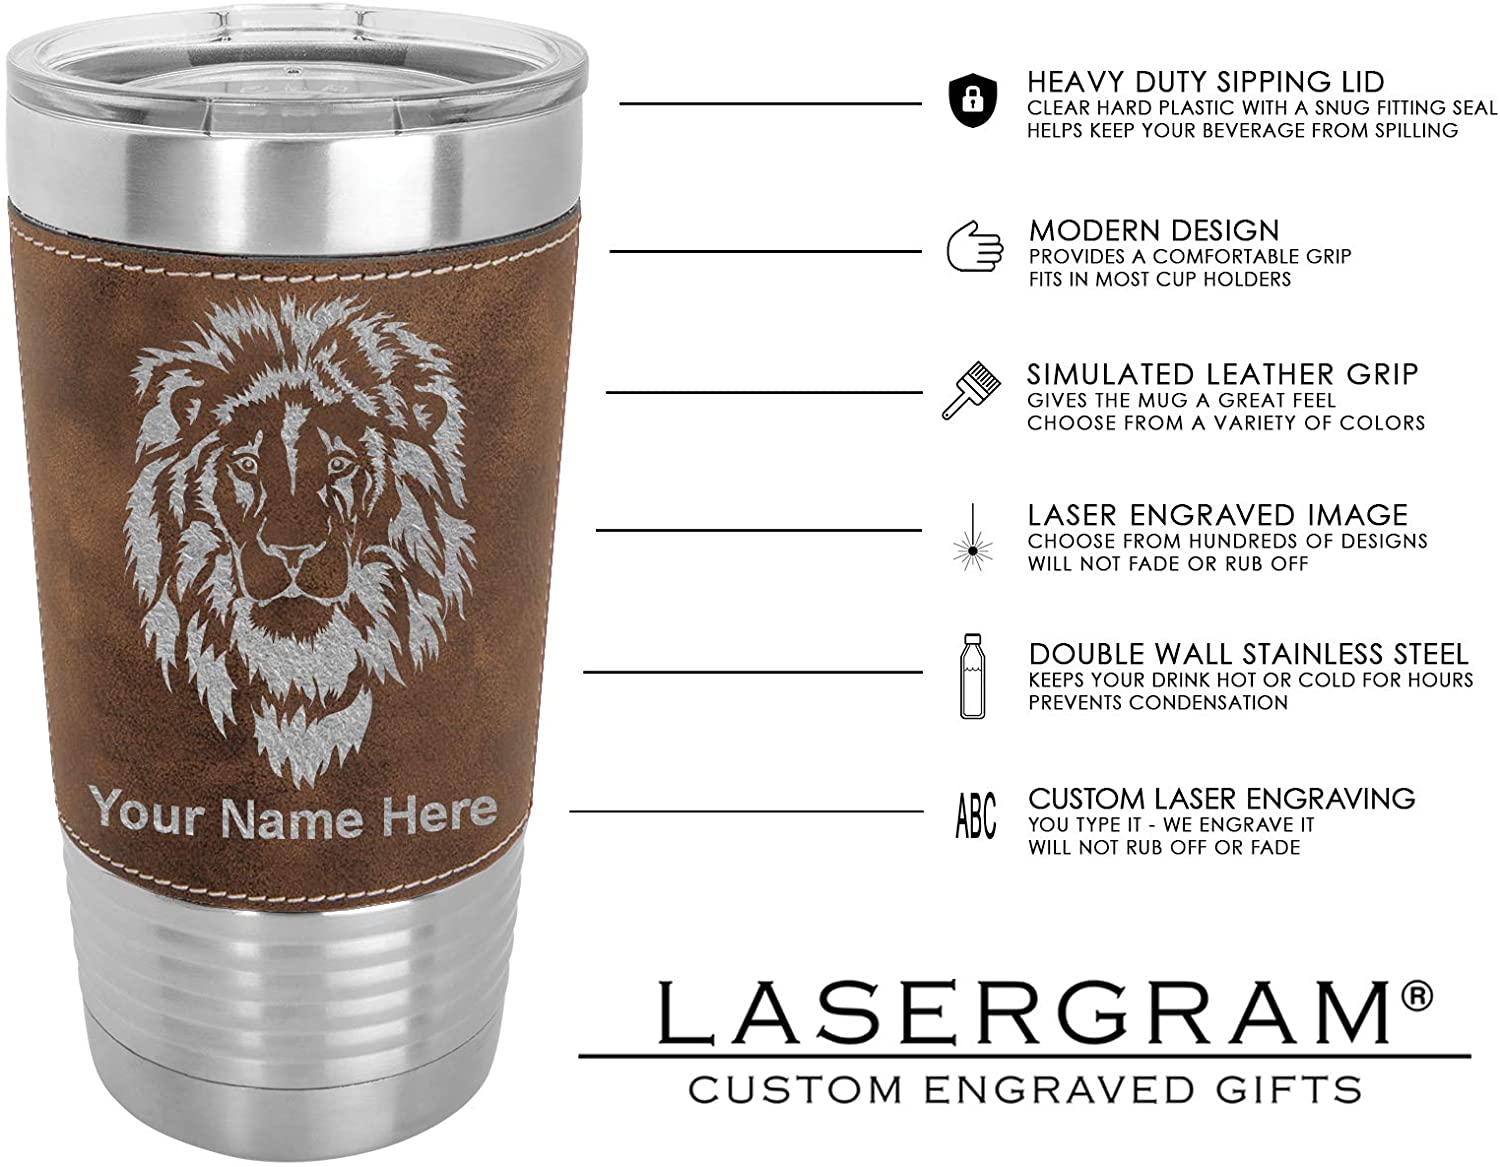  Personalized Tumblers, Stainless Steel 20 oz Tumbler w/Lid, 13  Different Designs